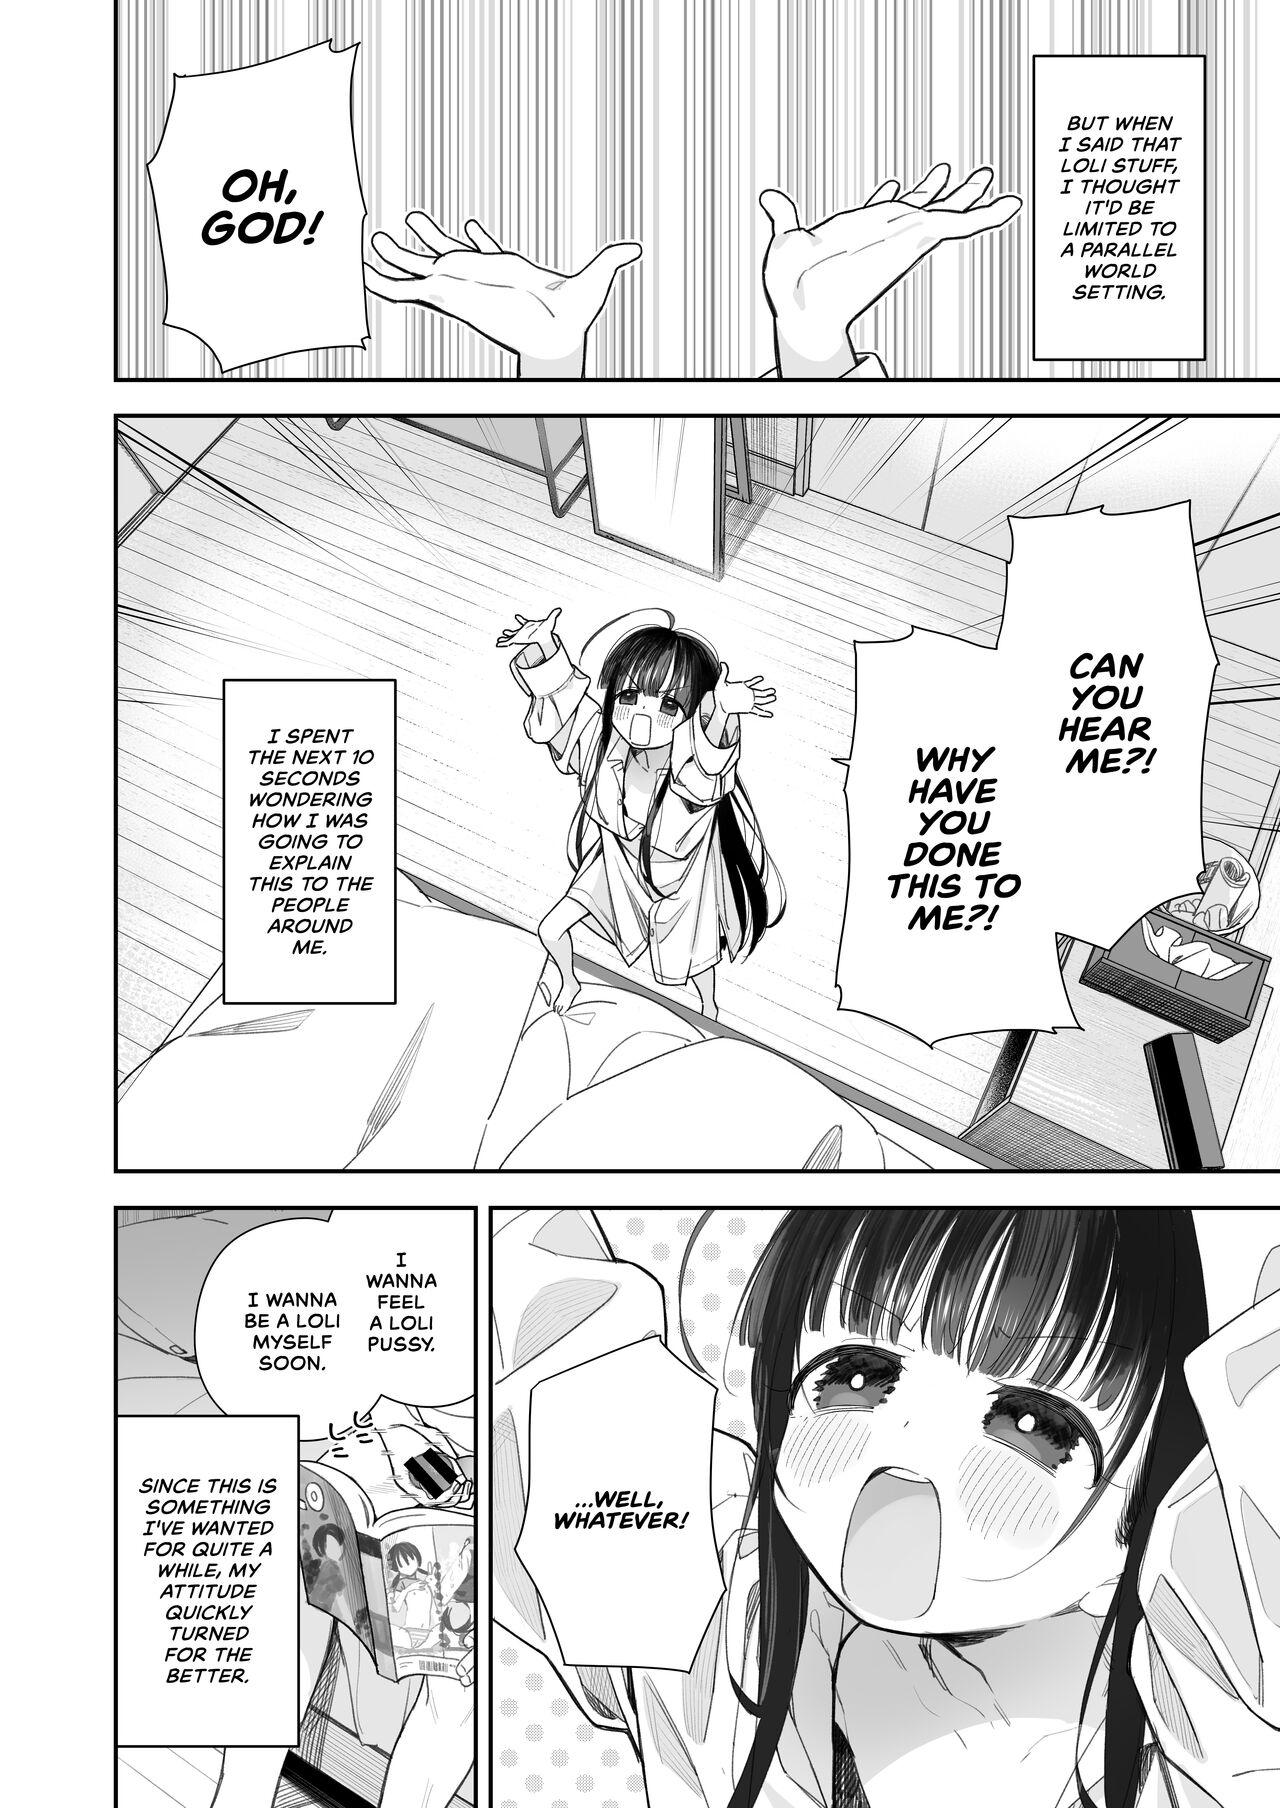 Slut Porn [Asunaro Neat. (Ronna)] TS Loli Oji-san no Bouken Onanie Hen | The Adventures of an Old Man Who Was Gender-Swapped Into a Loli ~Masturbation Chapter~ [English] [CulturedCommissions] [Digital] - Original Whooty - Page 5